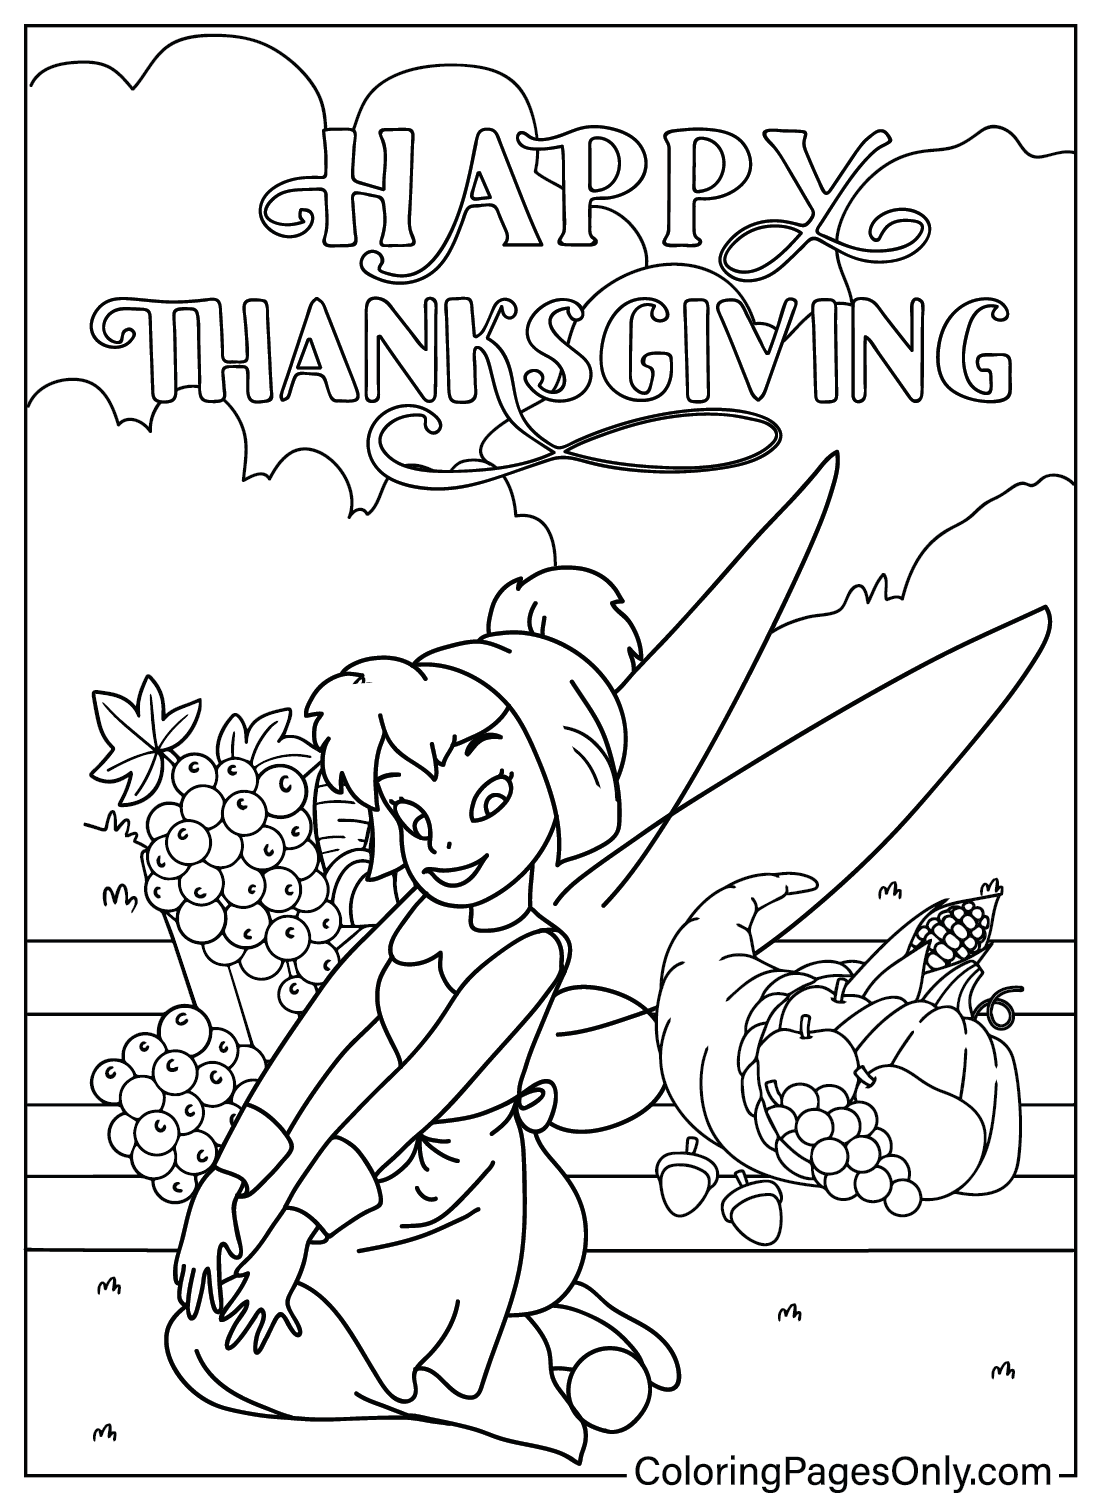 Disney Tinker Bell Thanksgiving Coloring Page from Disney Thanksgiving